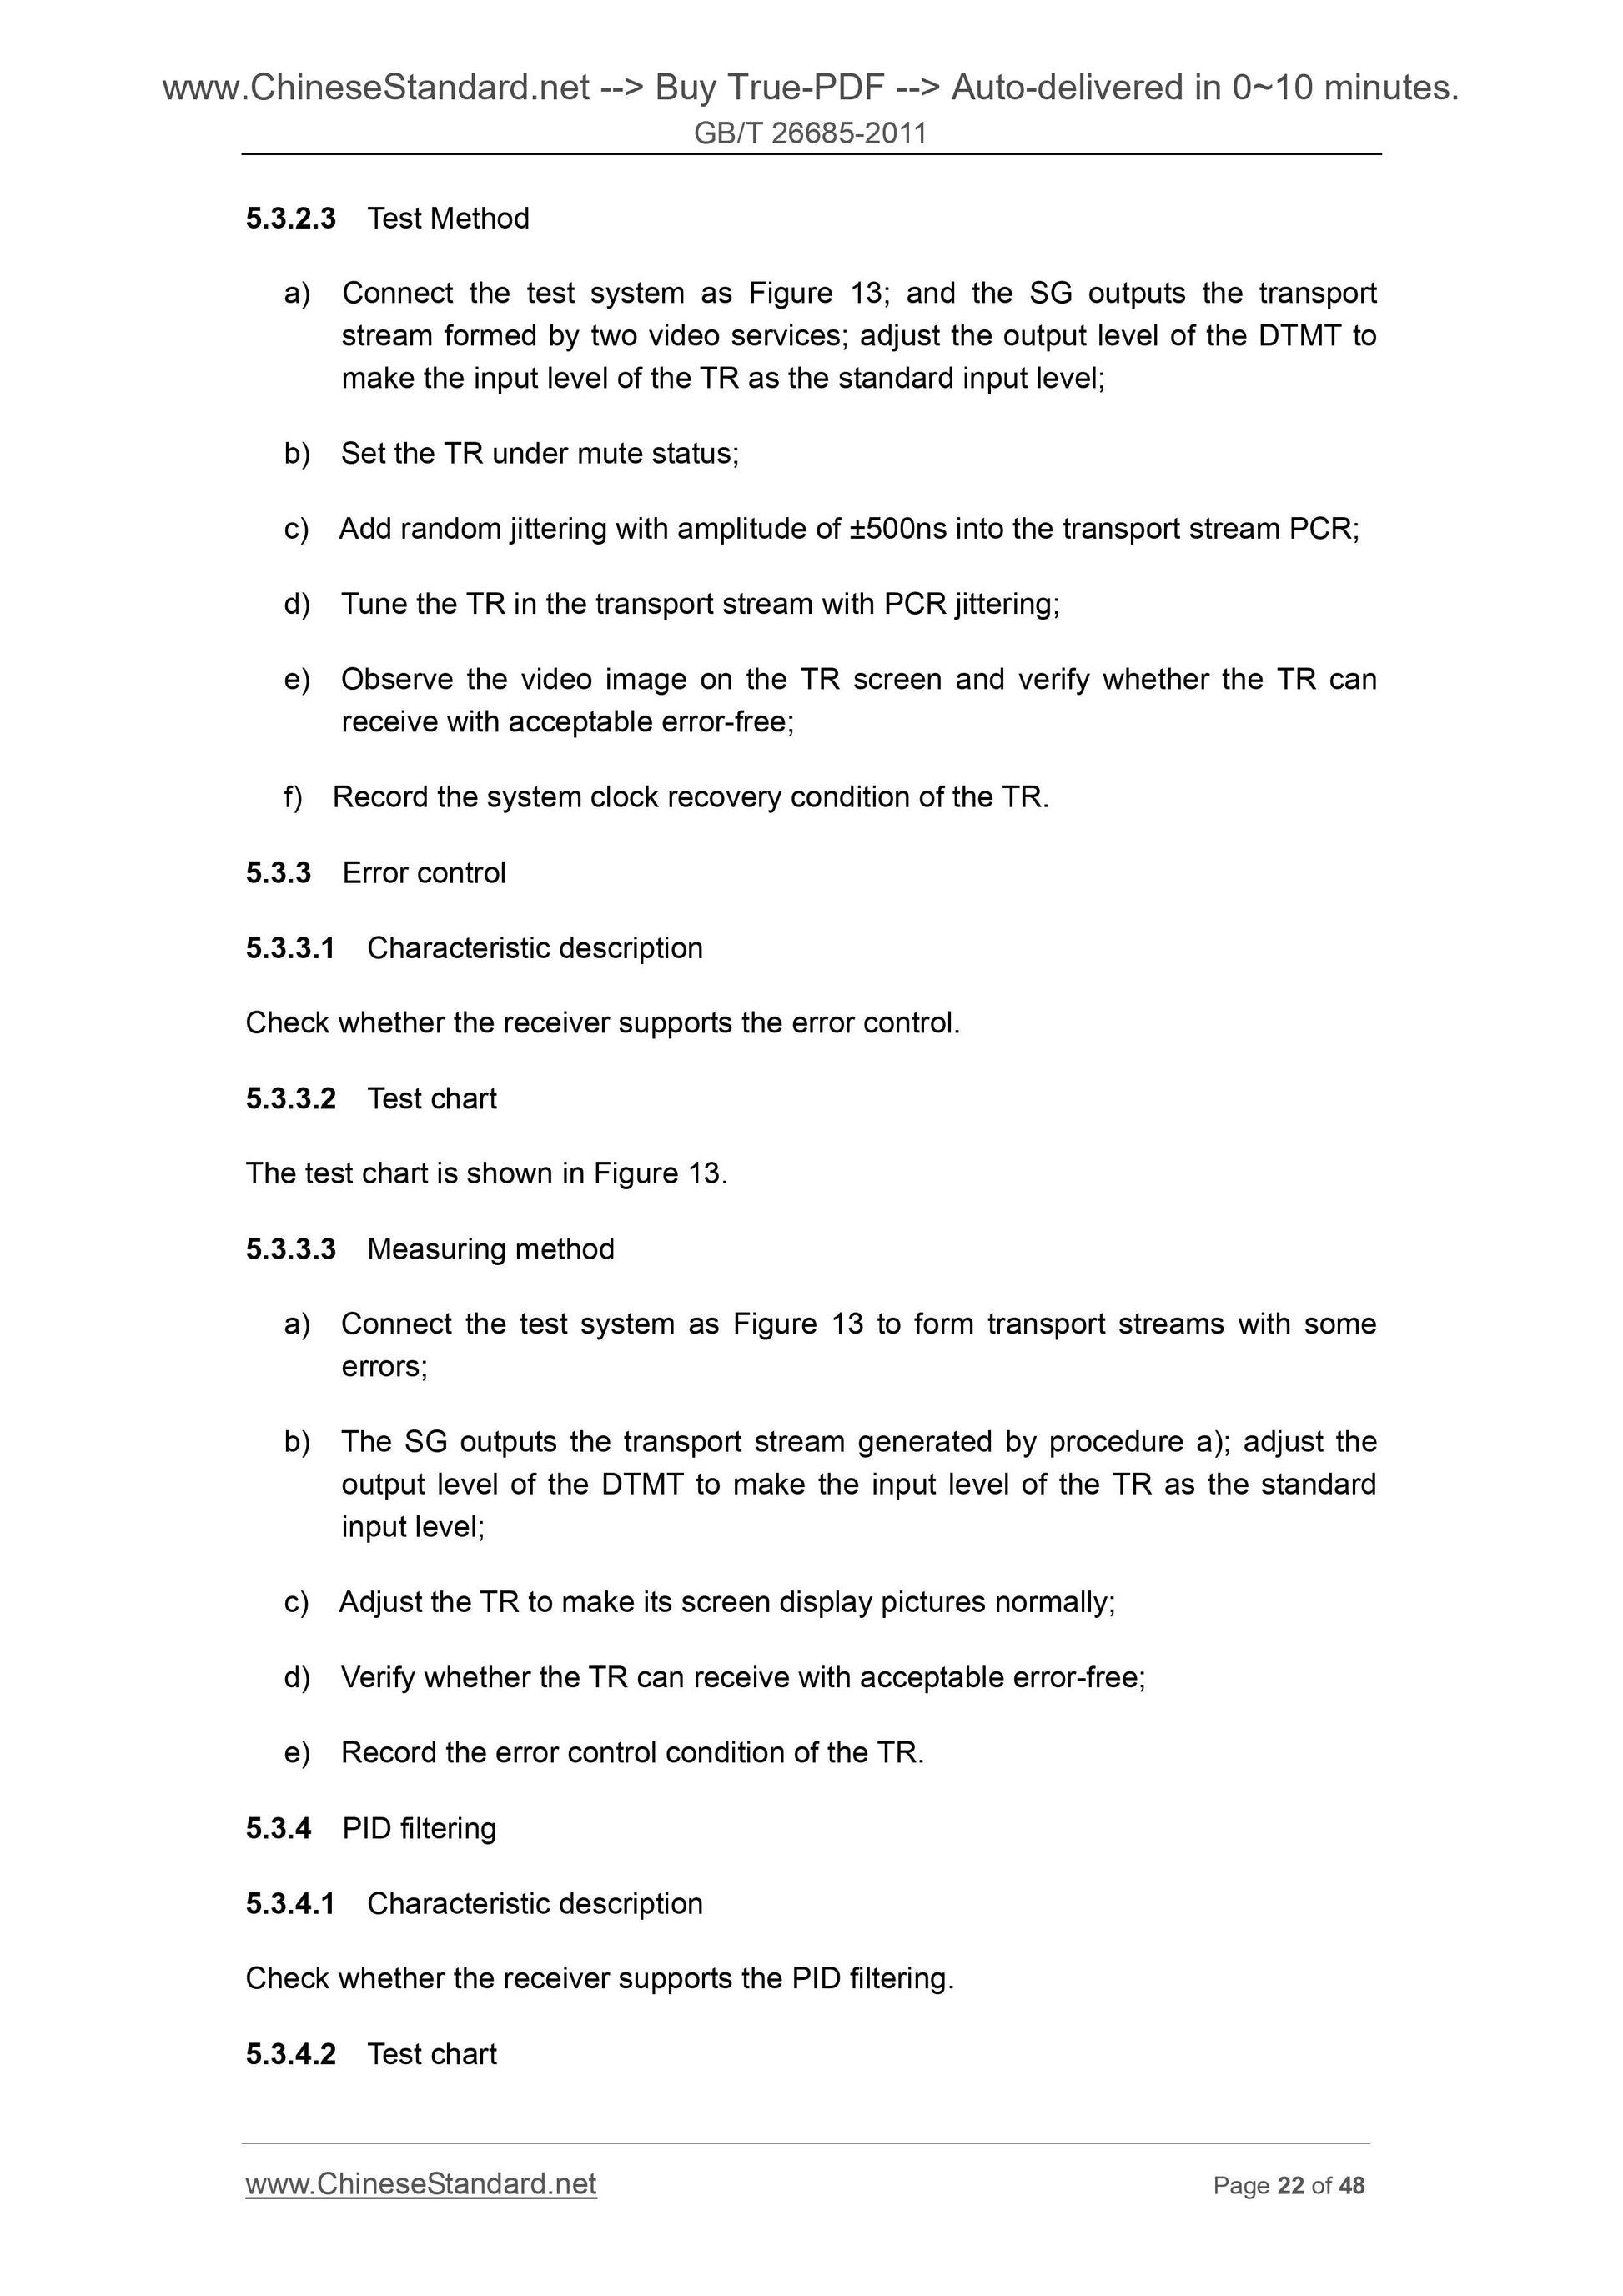 GB/T 26685-2011 Page 11